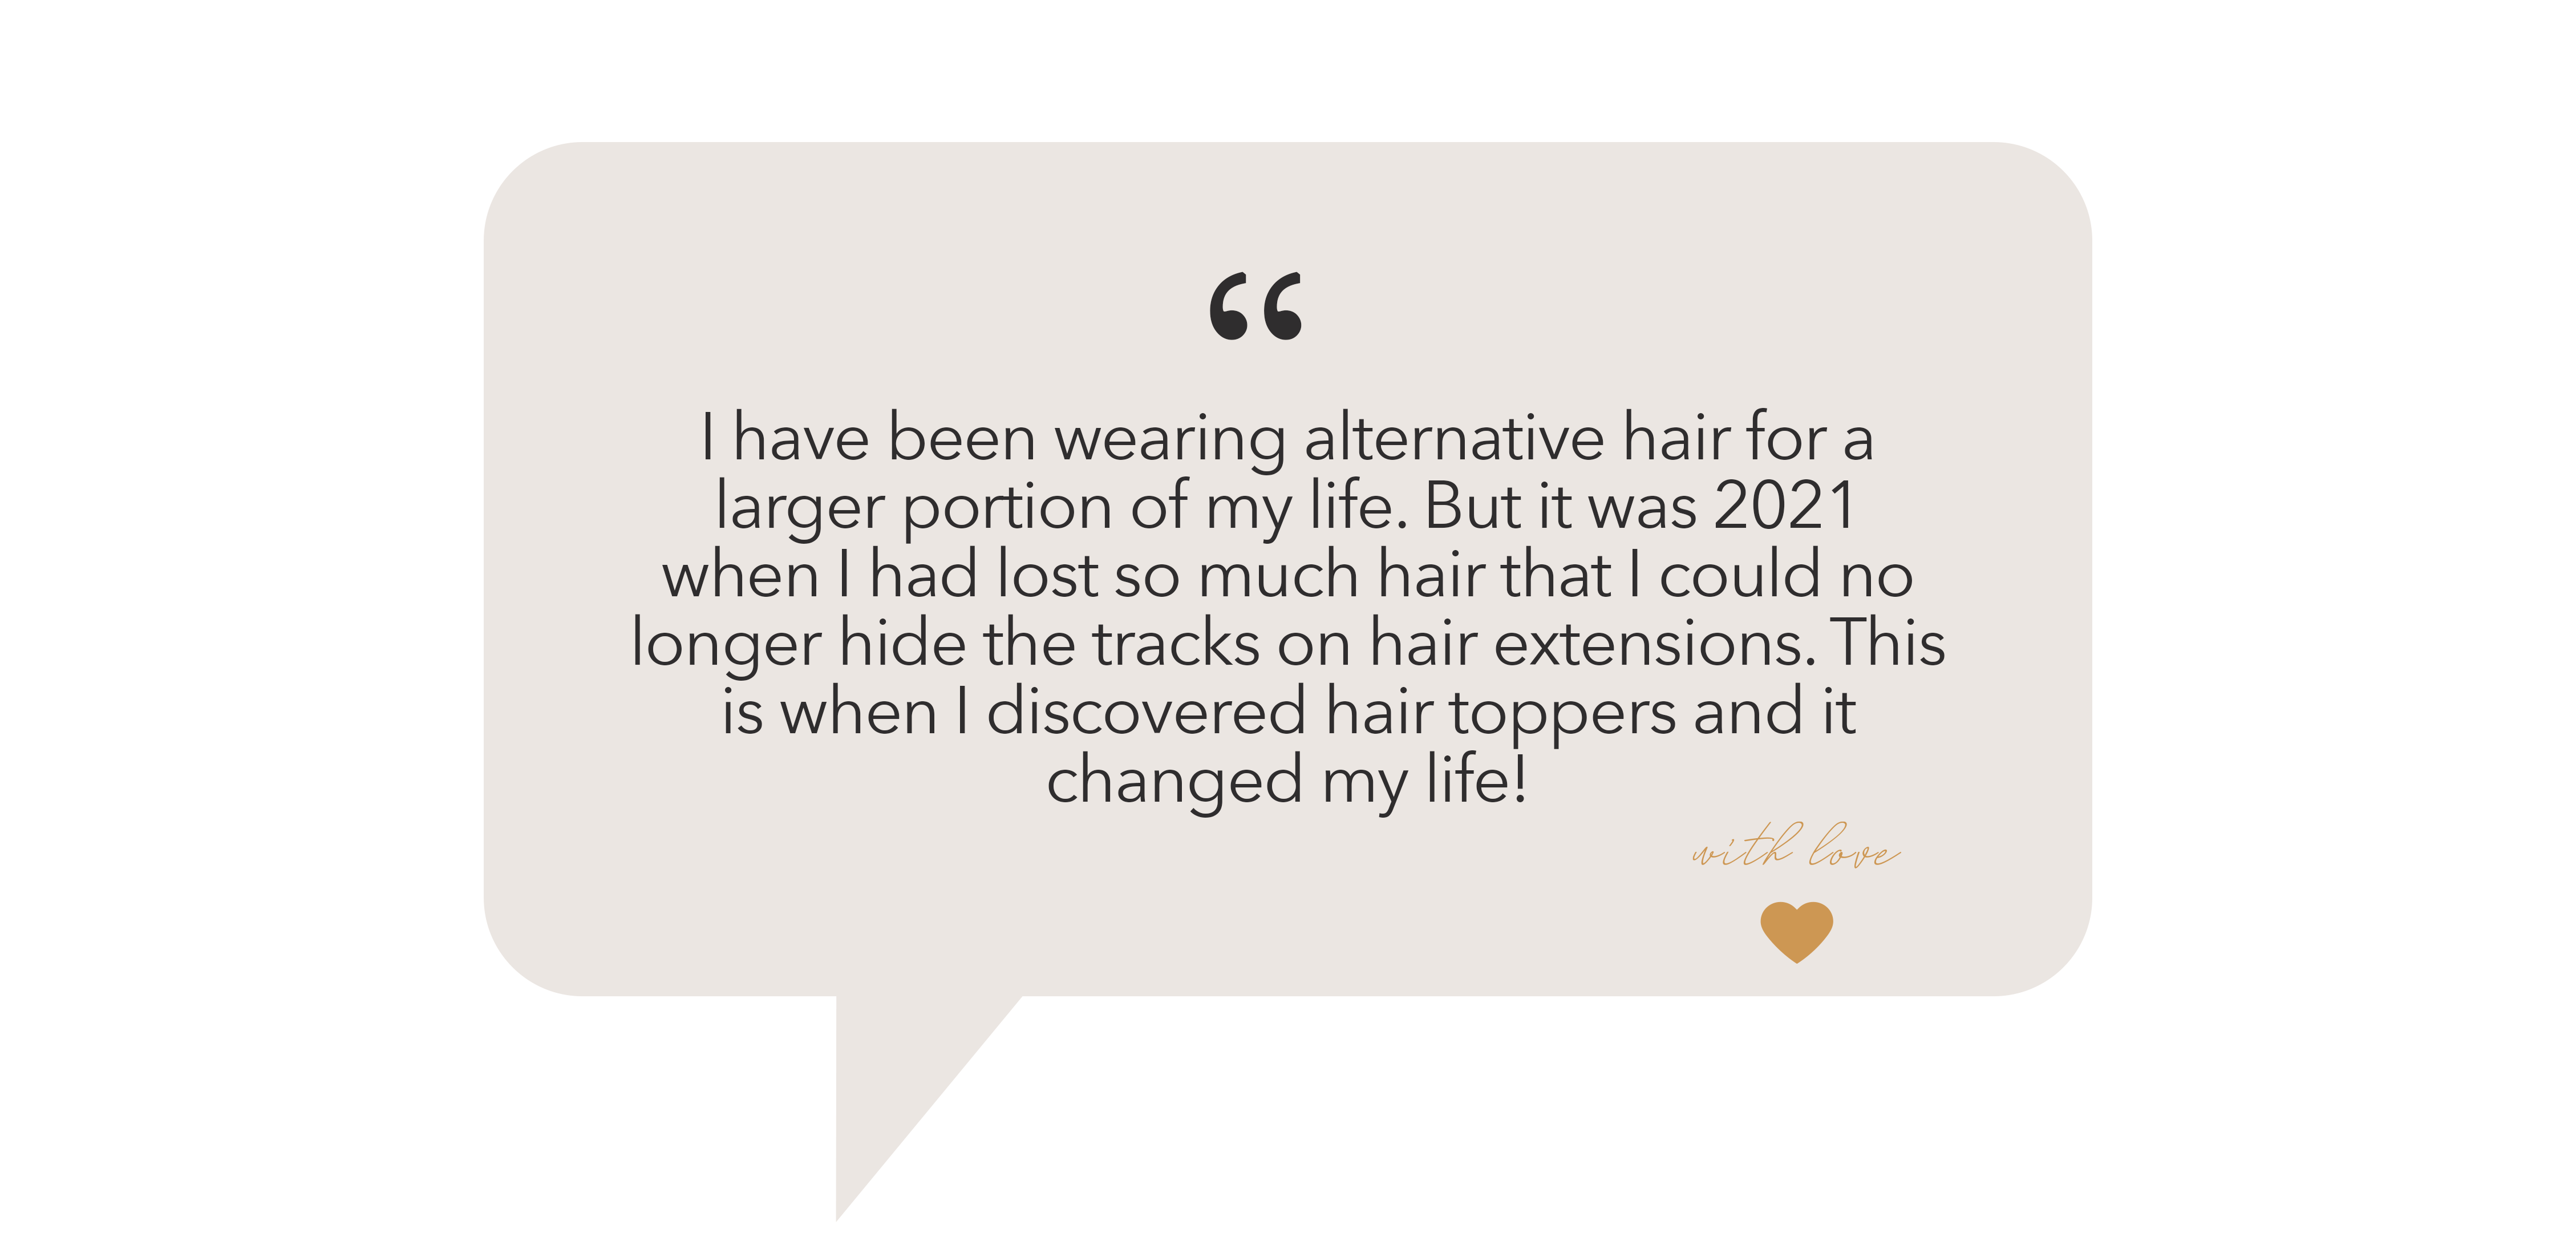 "I have been wearing alternative hair for a larger portion of my life. But it was 2021 when I had lost so much hair that I could no longer hide the tracks on hair extensions. This is when I discovered hair toppers and it changed my life! "